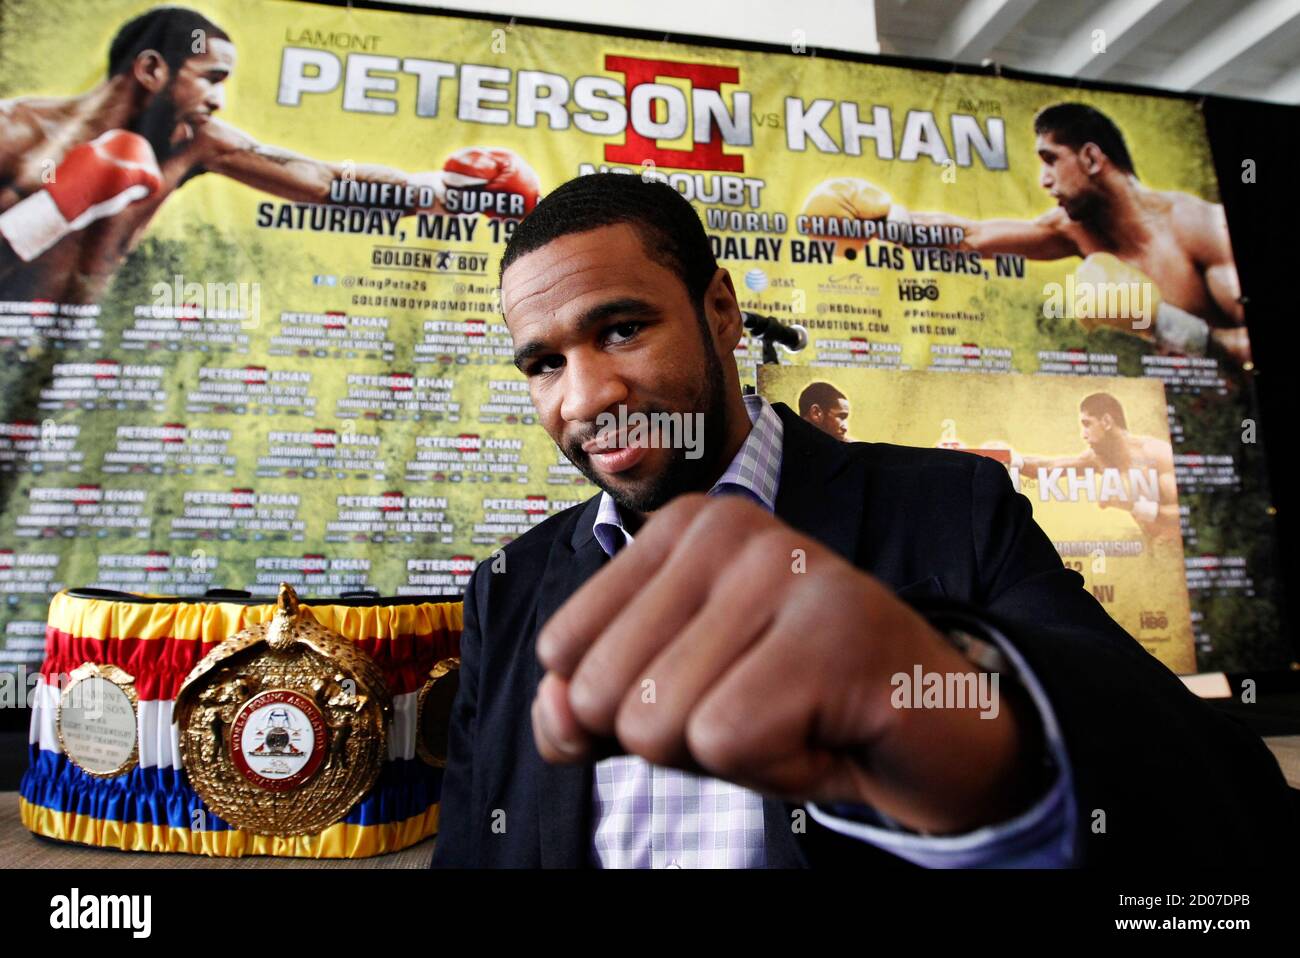 Welterweight boxing champion Lamont Peterson of the U.S. poses during a news conference in Washington March 15, 2012, to announce a rematch with Britain's Amir Khan in May. Khan lost his IBF and WBA light-welterweight titles after a shock defeat to Peterson in a controversial split decision in Washington last December.   REUTERS/Kevin Lamarque (UNITED STATES - Tags: SPORT BOXING) Stock Photo